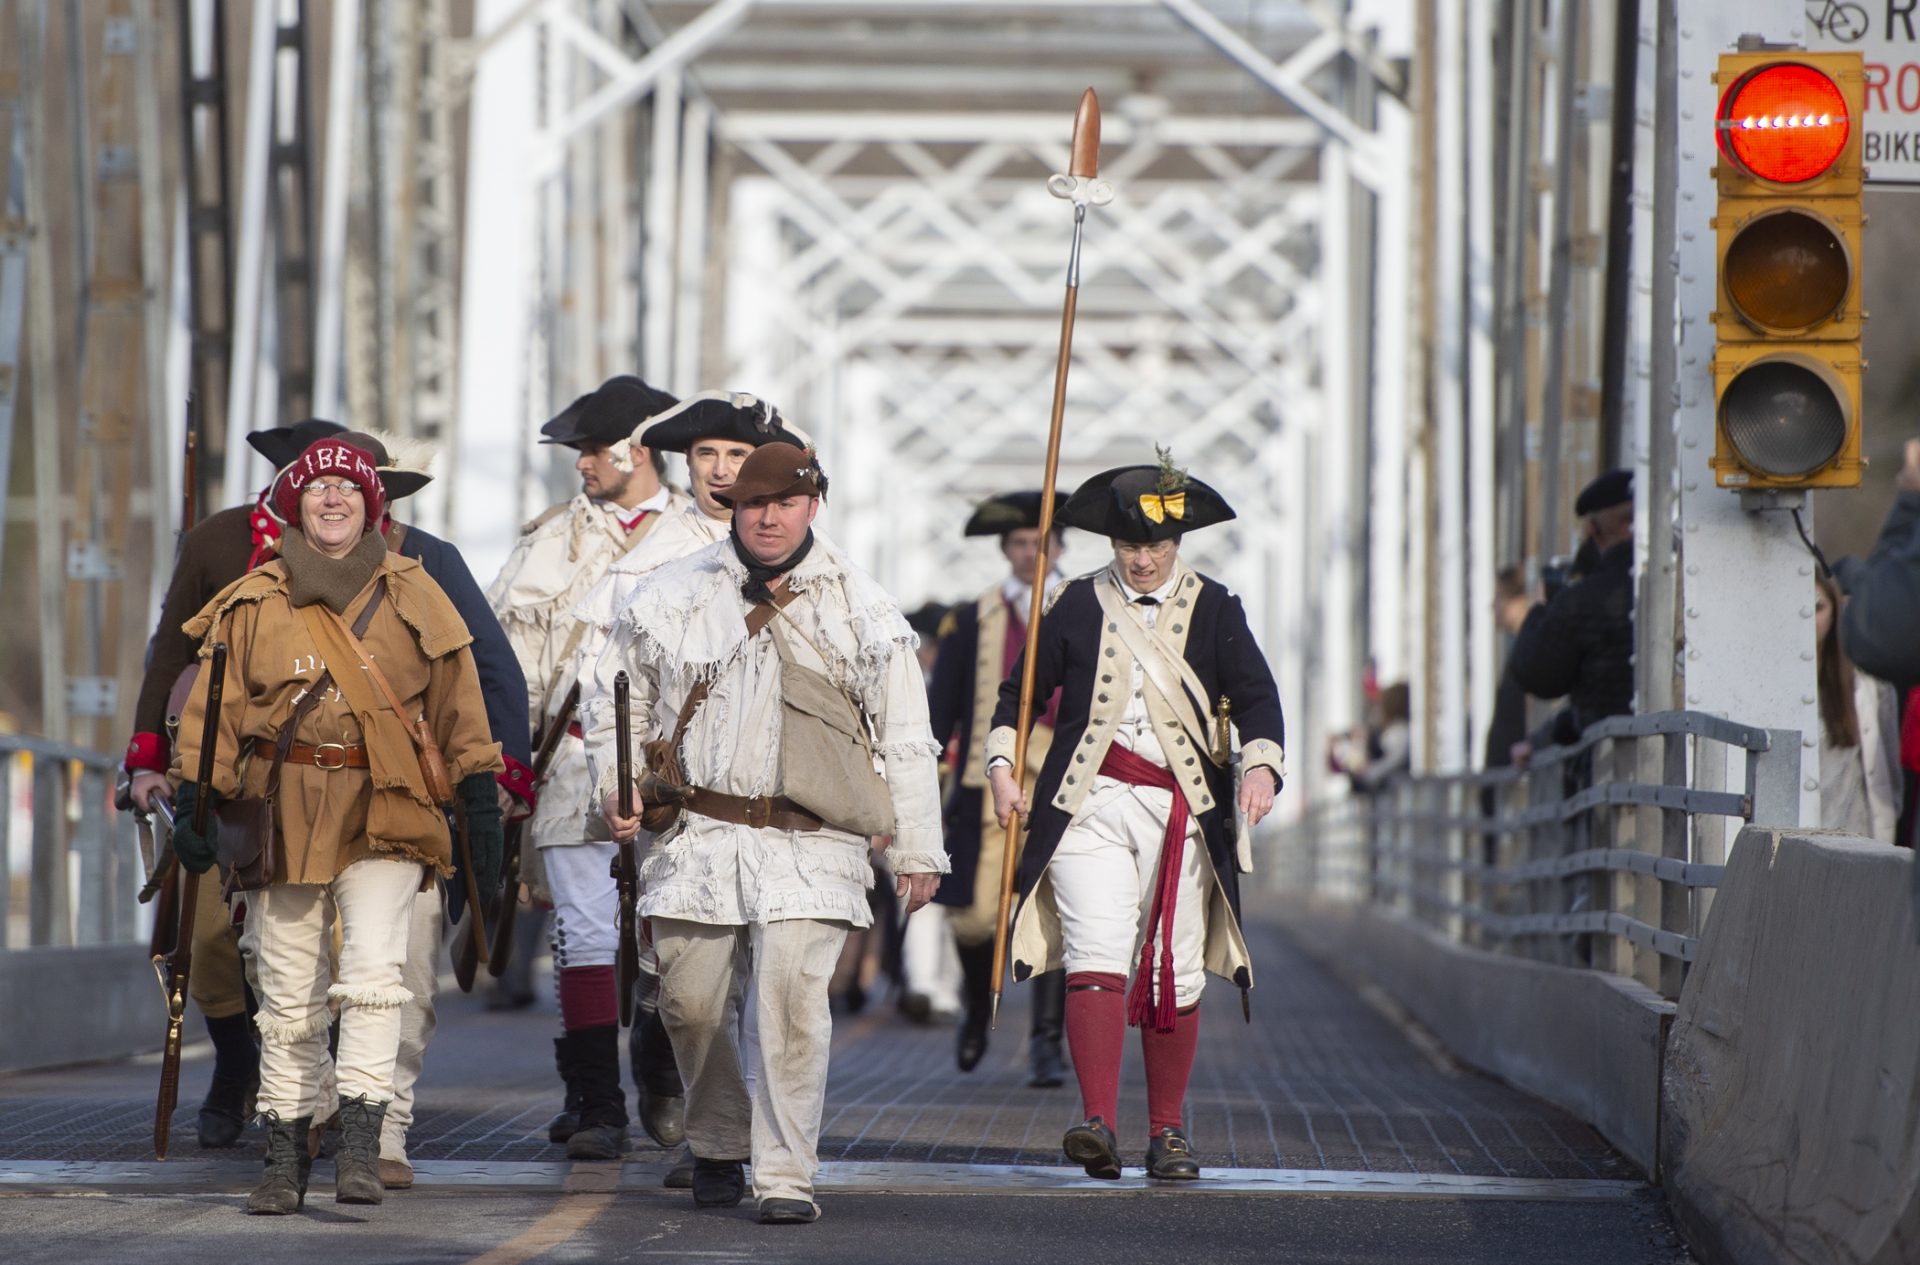 After crossing the Delaware River, troops march across the bridge at Washington's Crossing that connects New Jersey and Pennsylvania.